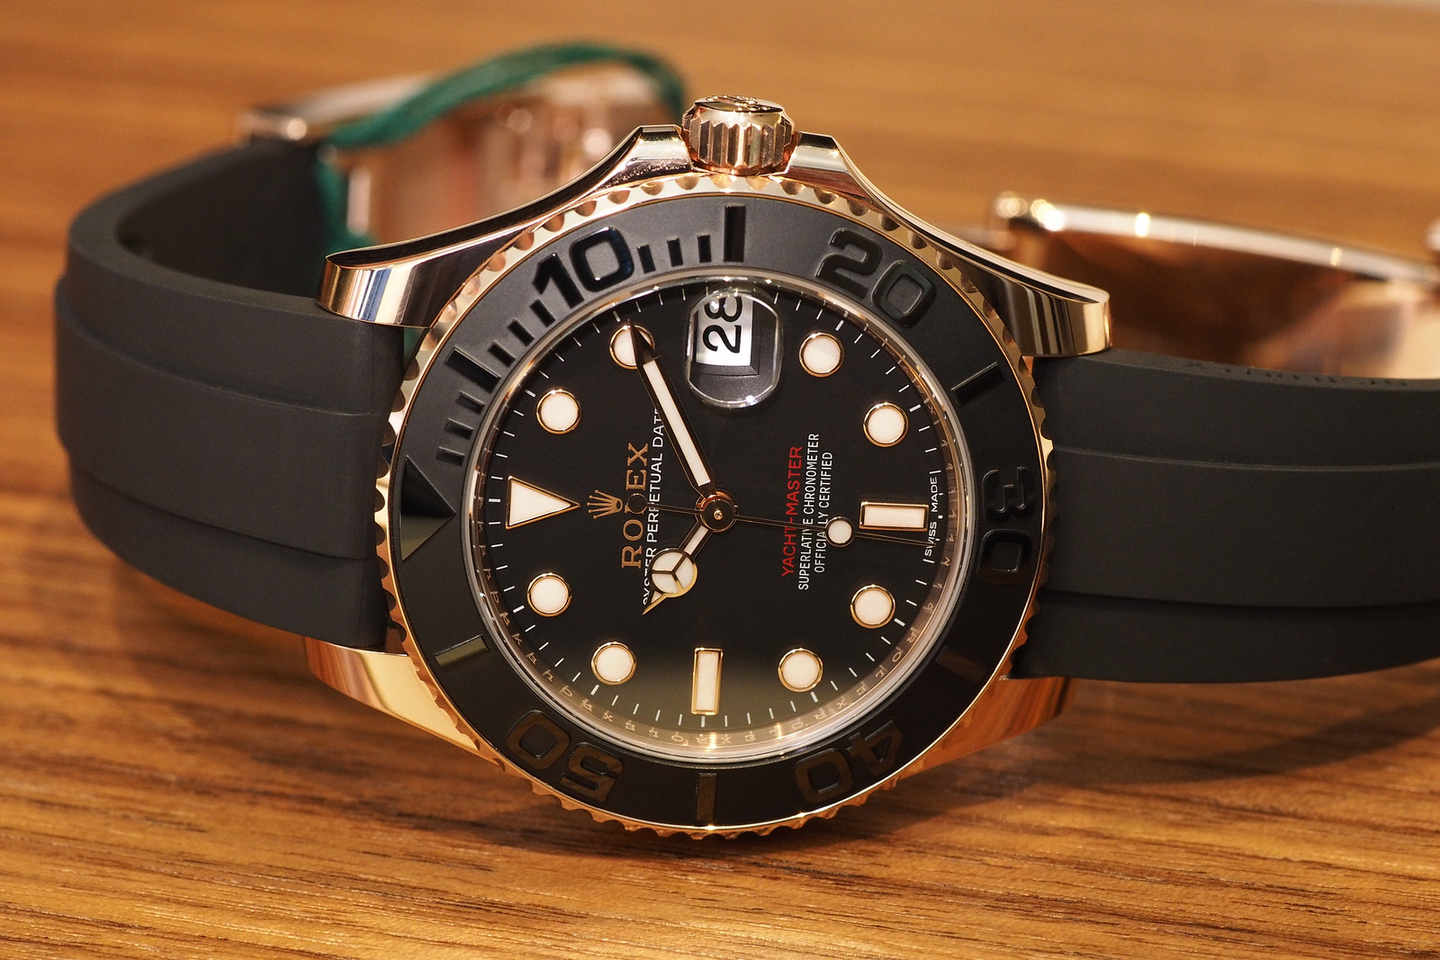 The new Rolex Yacht-Master in Everose Gold with Cerachrom Bezel